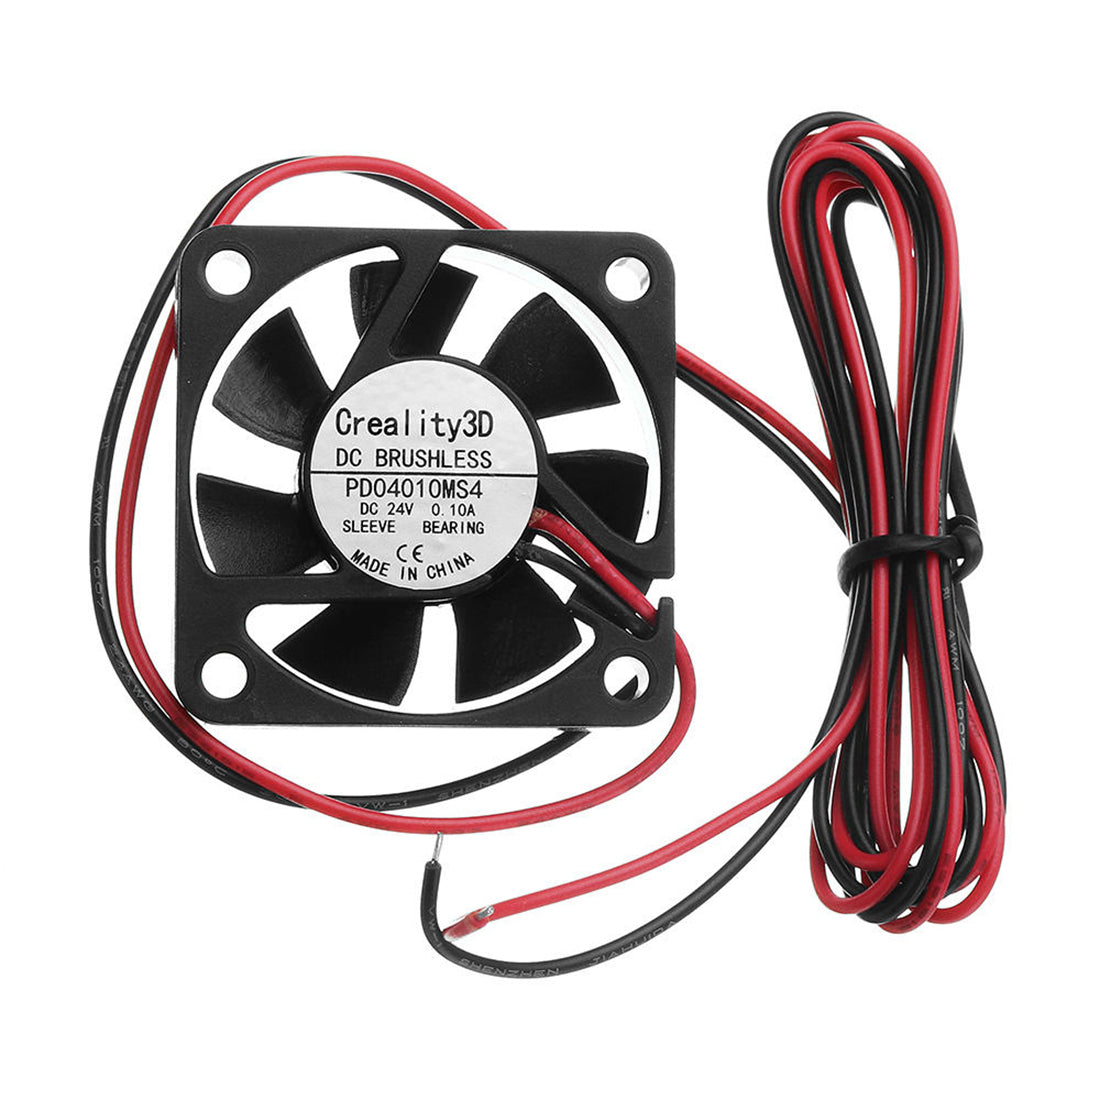 Creality Nozzle Cooling Fan 24V /0.10A High Speed DC Brushless for Ender-3 /Ender-3 Pro